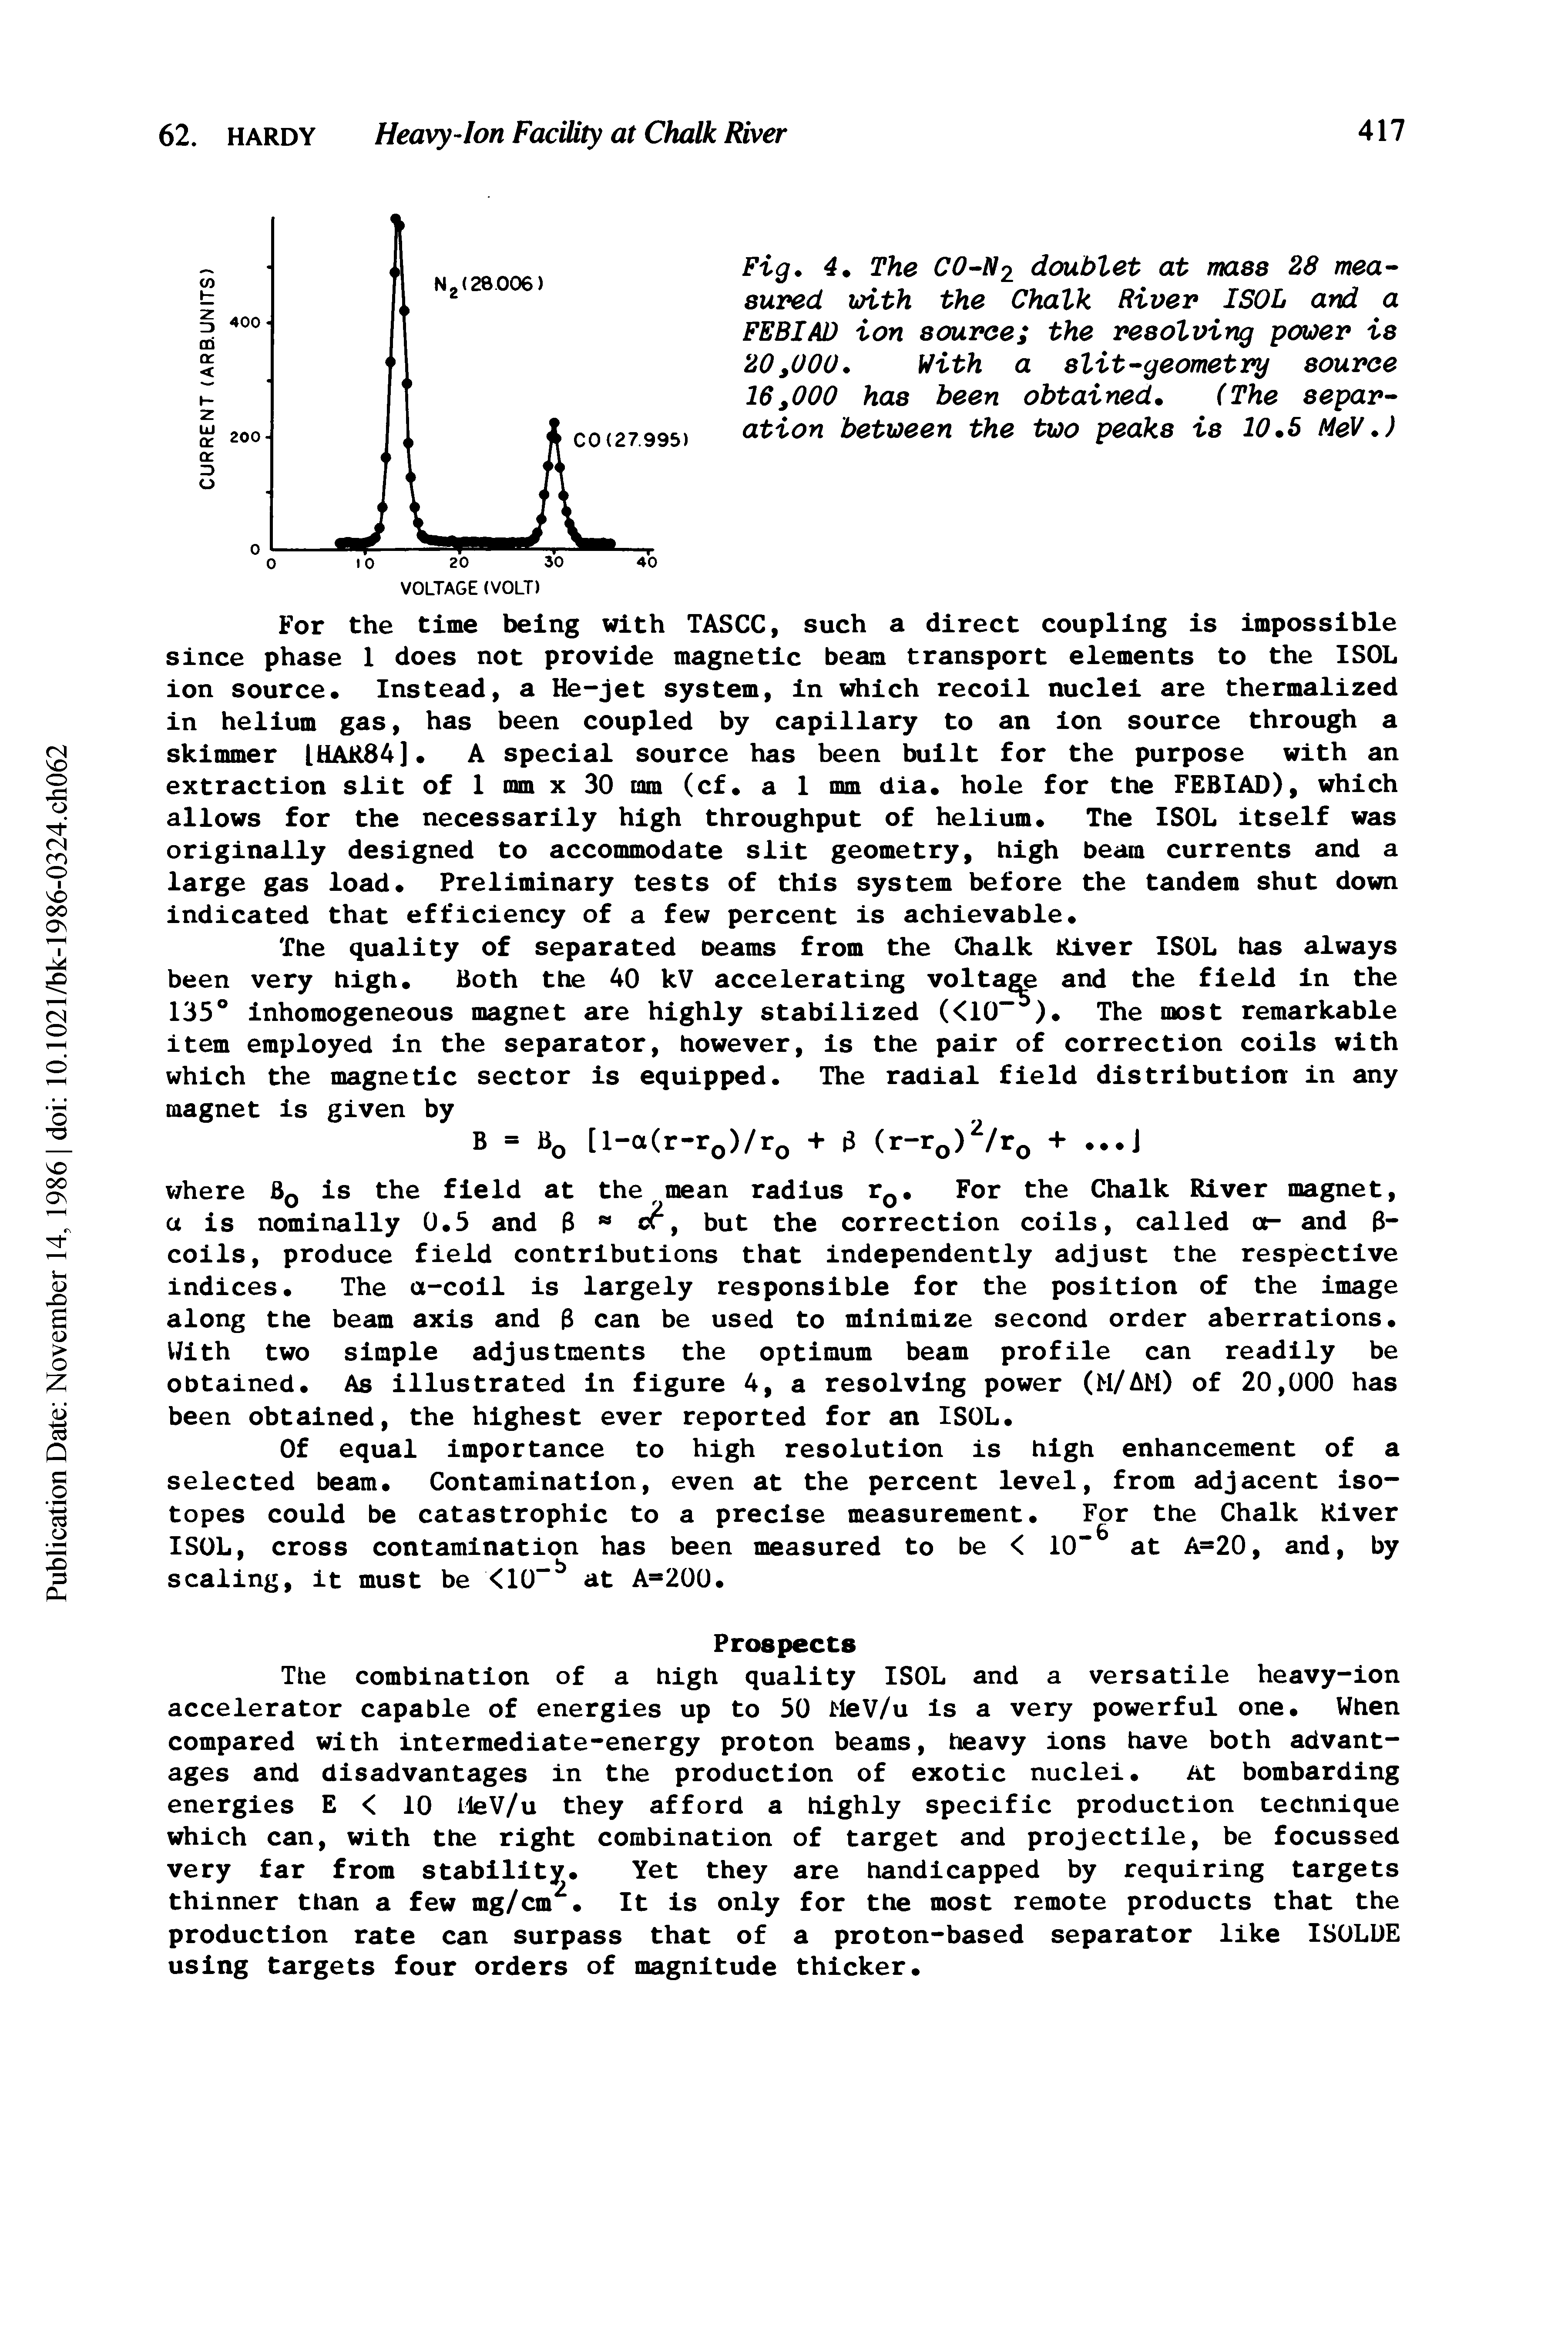 Fig. 4. The CO-N2 doublet at mass 28 measured with the Chalk River ISOL and a FEBIAD ion source the resolving power is 20,000. With a slit-geometry source 16,000 has been obtained. (The separation between the two peaks is 10.5 MeV.)...